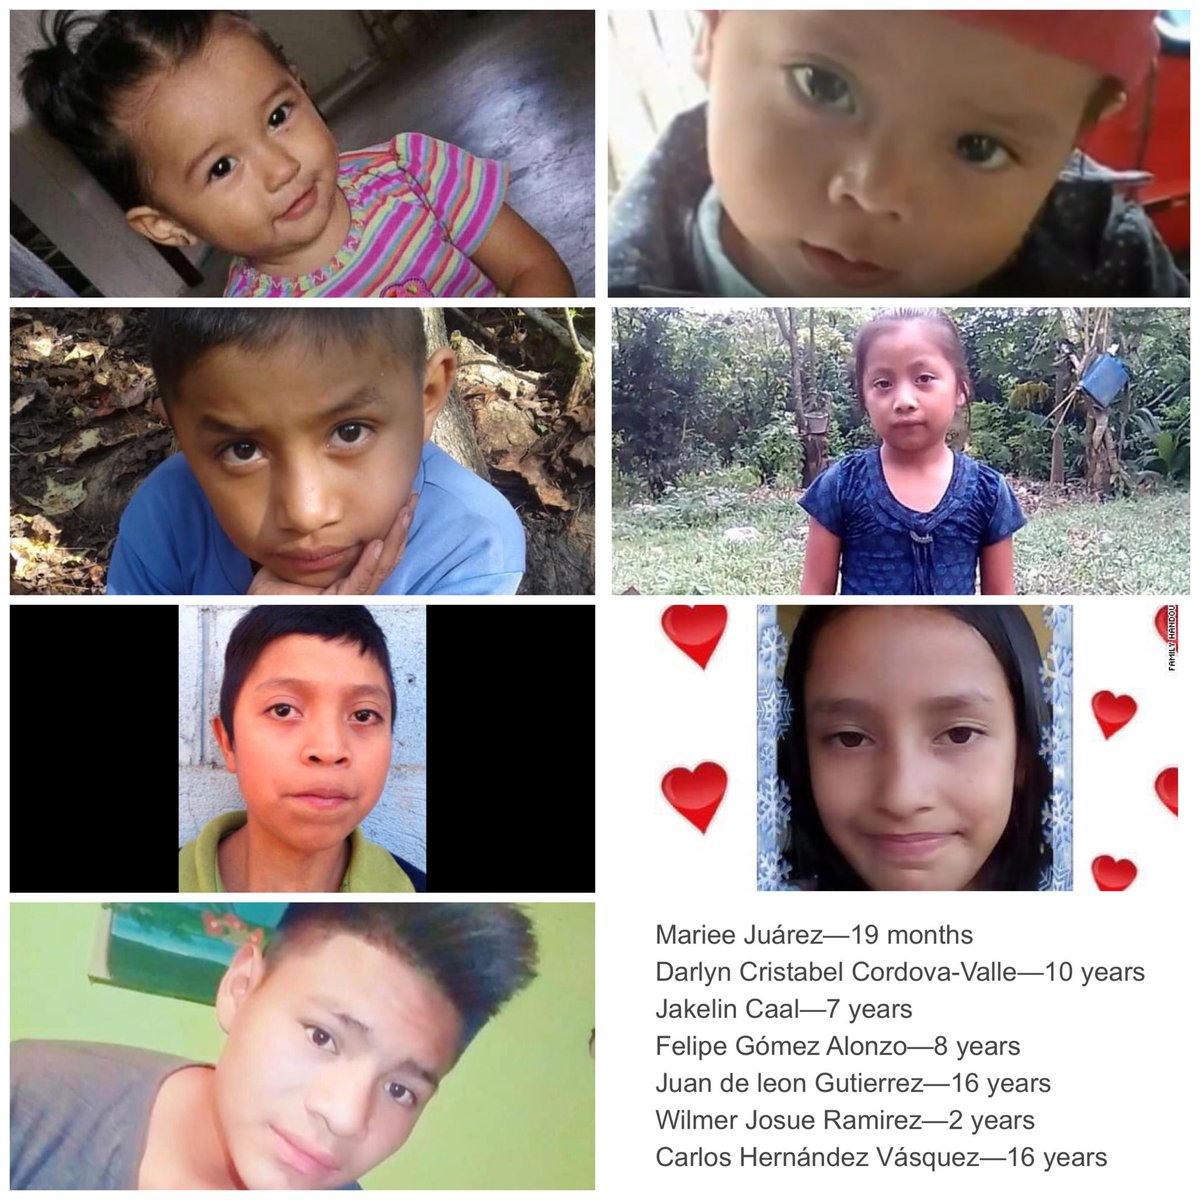 Not to mention, in case y'all fricken forgot, cuz I HAVEN'T, but SEVEN CHILDREN DIED in Federal custody inside of a year because of this administration's zero tolerance POLICY of taking those kids away from their parents, and otherwise detaining them. #NeverForget  #AbolishDHS